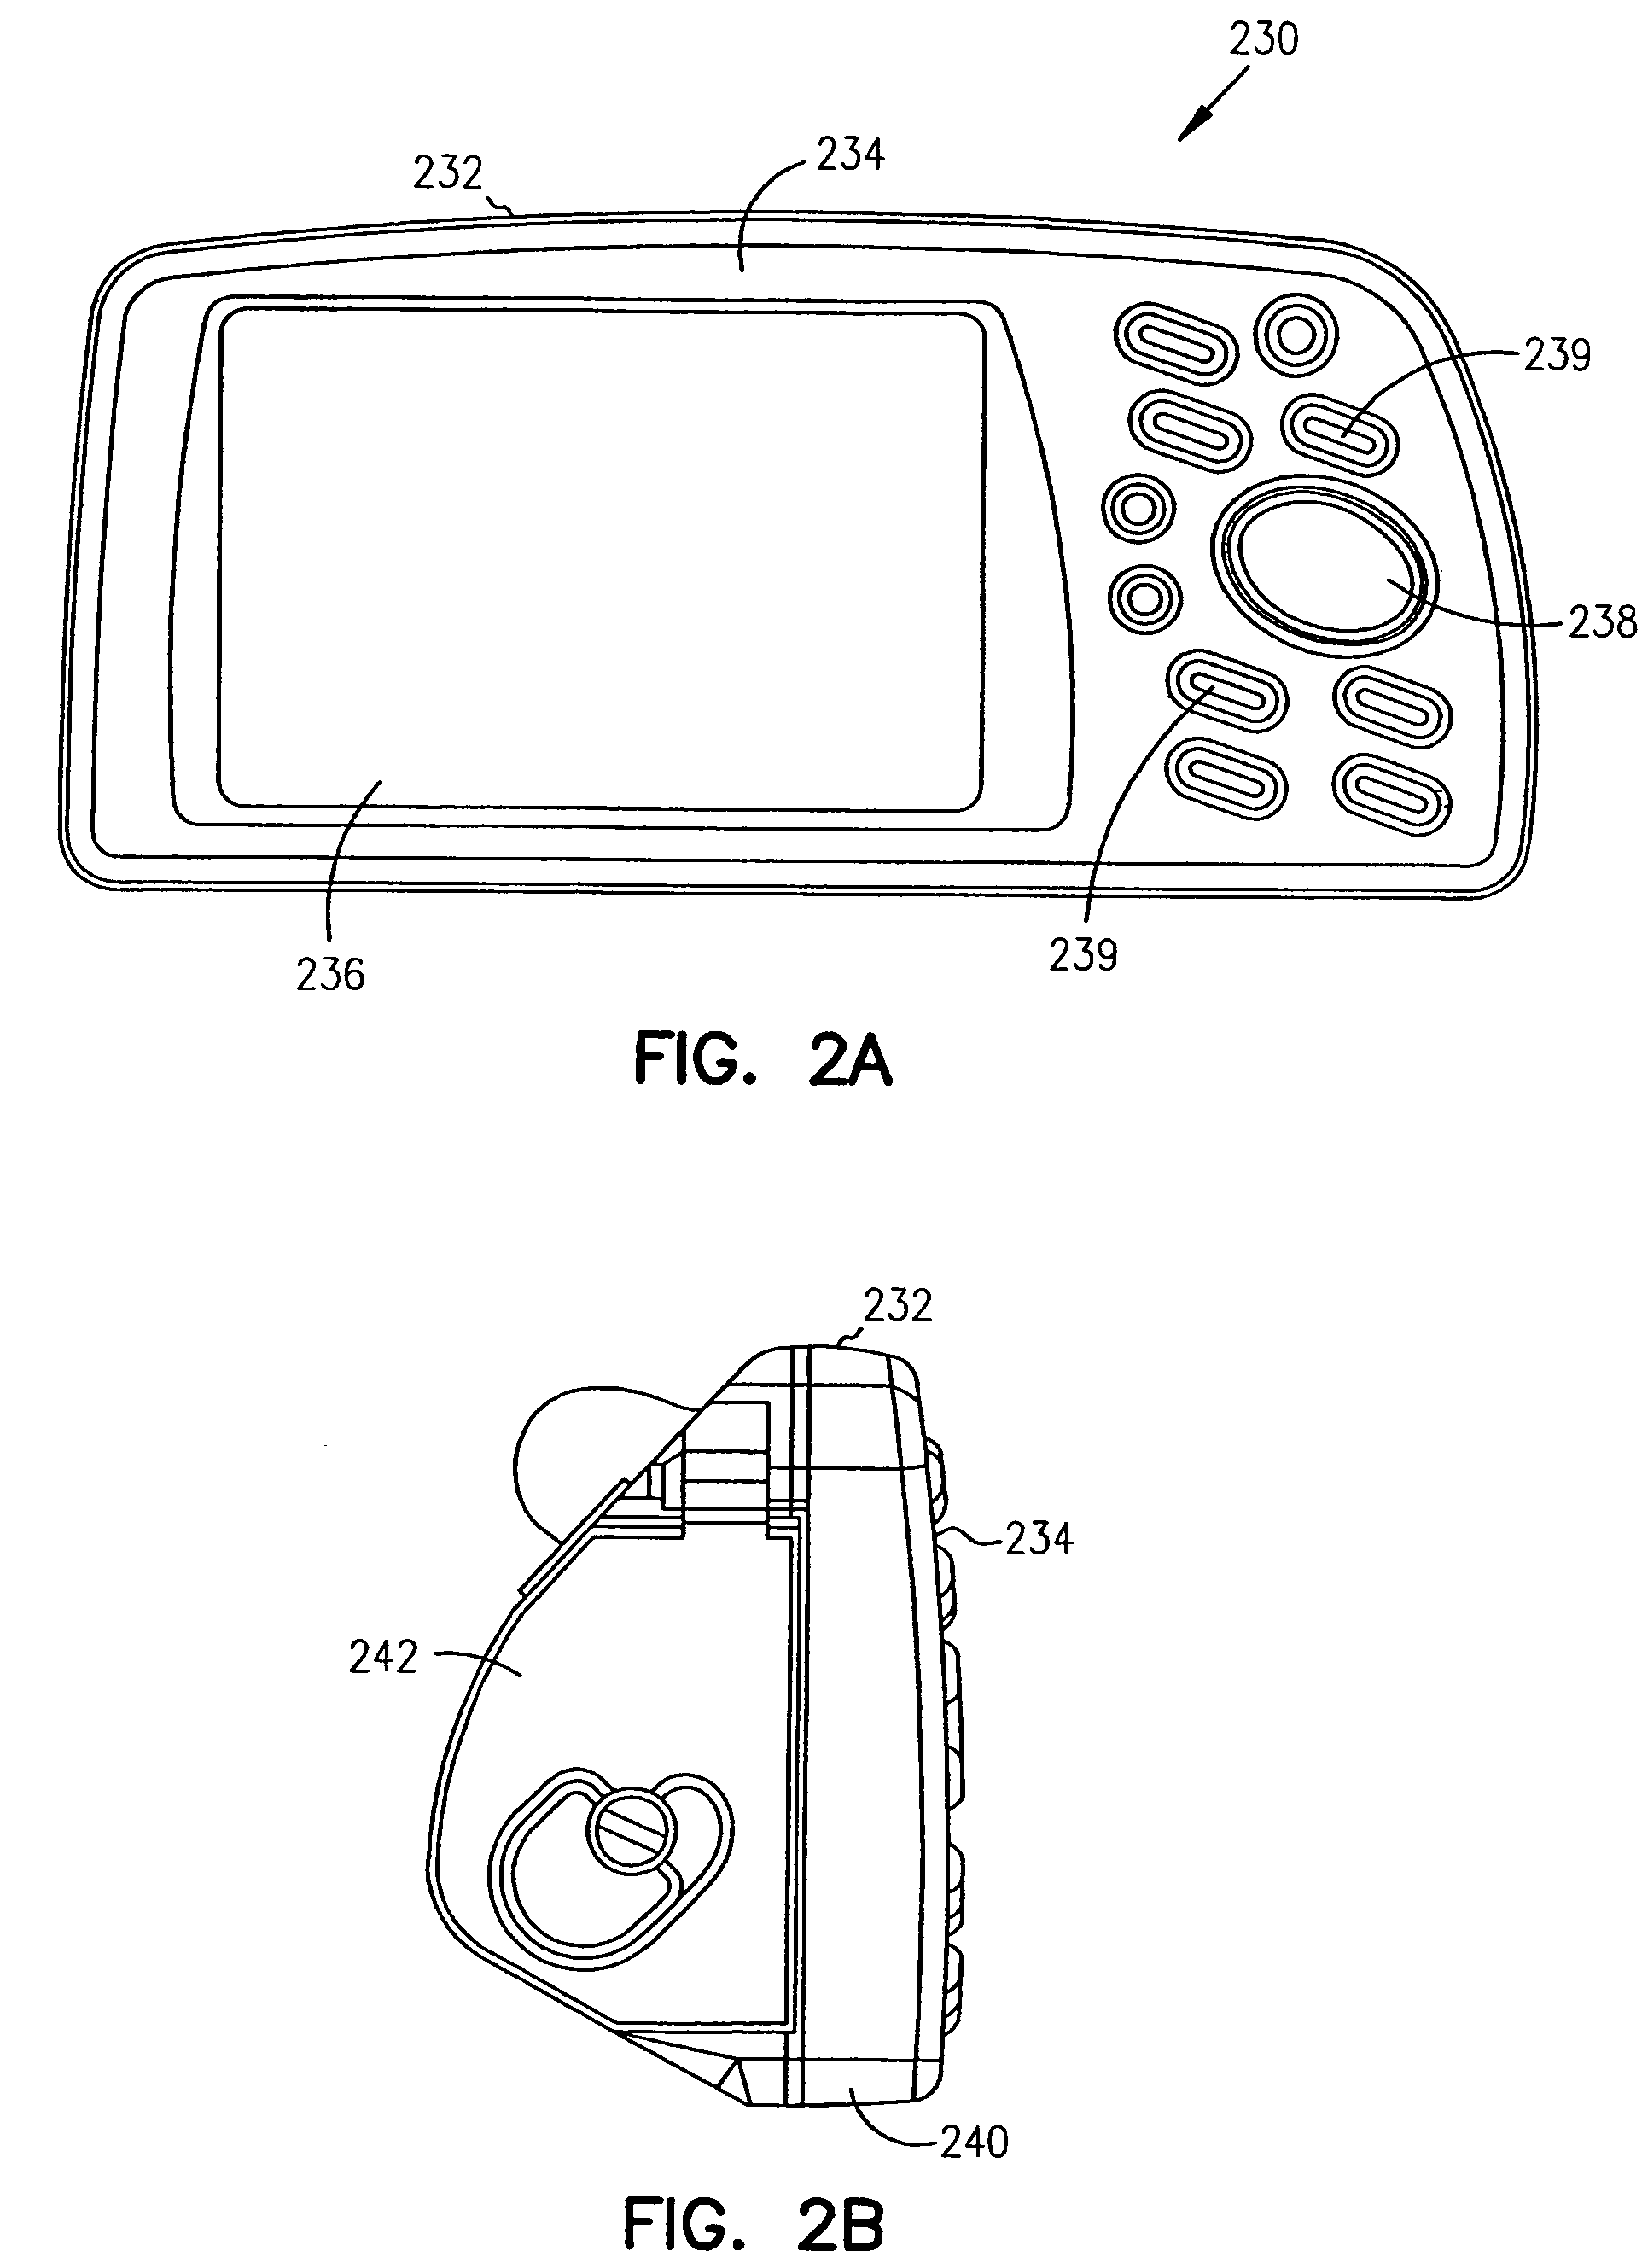 Systems and methods with integrated triangulation positioning and dead reckoning capabilities